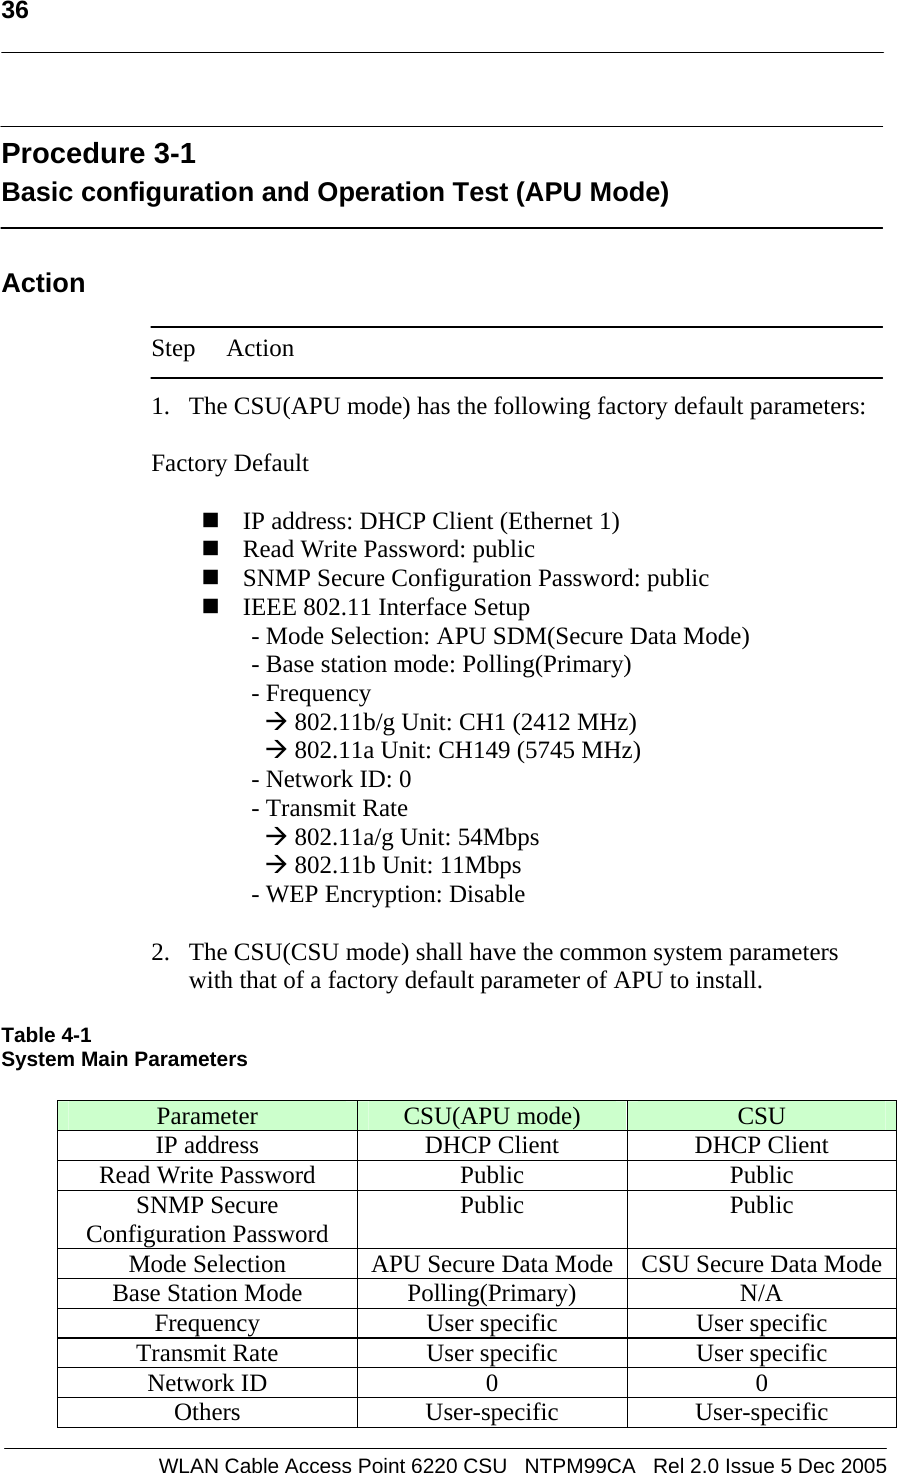   36  WLAN Cable Access Point 6220 CSU   NTPM99CA   Rel 2.0 Issue 5 Dec 2005  Procedure 3-1 Basic configuration and Operation Test (APU Mode)  Action  Step Action  1. The CSU(APU mode) has the following factory default parameters:  Factory Default   IP address: DHCP Client (Ethernet 1)  Read Write Password: public  SNMP Secure Configuration Password: public  IEEE 802.11 Interface Setup - Mode Selection: APU SDM(Secure Data Mode)  - Base station mode: Polling(Primary)             - Frequency Æ 802.11b/g Unit: CH1 (2412 MHz)  Æ 802.11a Unit: CH149 (5745 MHz)              - Network ID: 0 - Transmit Rate Æ 802.11a/g Unit: 54Mbps Æ 802.11b Unit: 11Mbps - WEP Encryption: Disable  2. The CSU(CSU mode) shall have the common system parameters with that of a factory default parameter of APU to install.   Table 4-1 System Main Parameters  Parameter  CSU(APU mode)  CSU IP address  DHCP Client  DHCP Client Read Write Password  Public  Public SNMP Secure Configuration Password  Public Public Mode Selection  APU Secure Data Mode CSU Secure Data ModeBase Station Mode  Polling(Primary)  N/A Frequency  User specific  User specific Transmit Rate  User specific  User specific Network ID  0  0 Others User-specific User-specific 